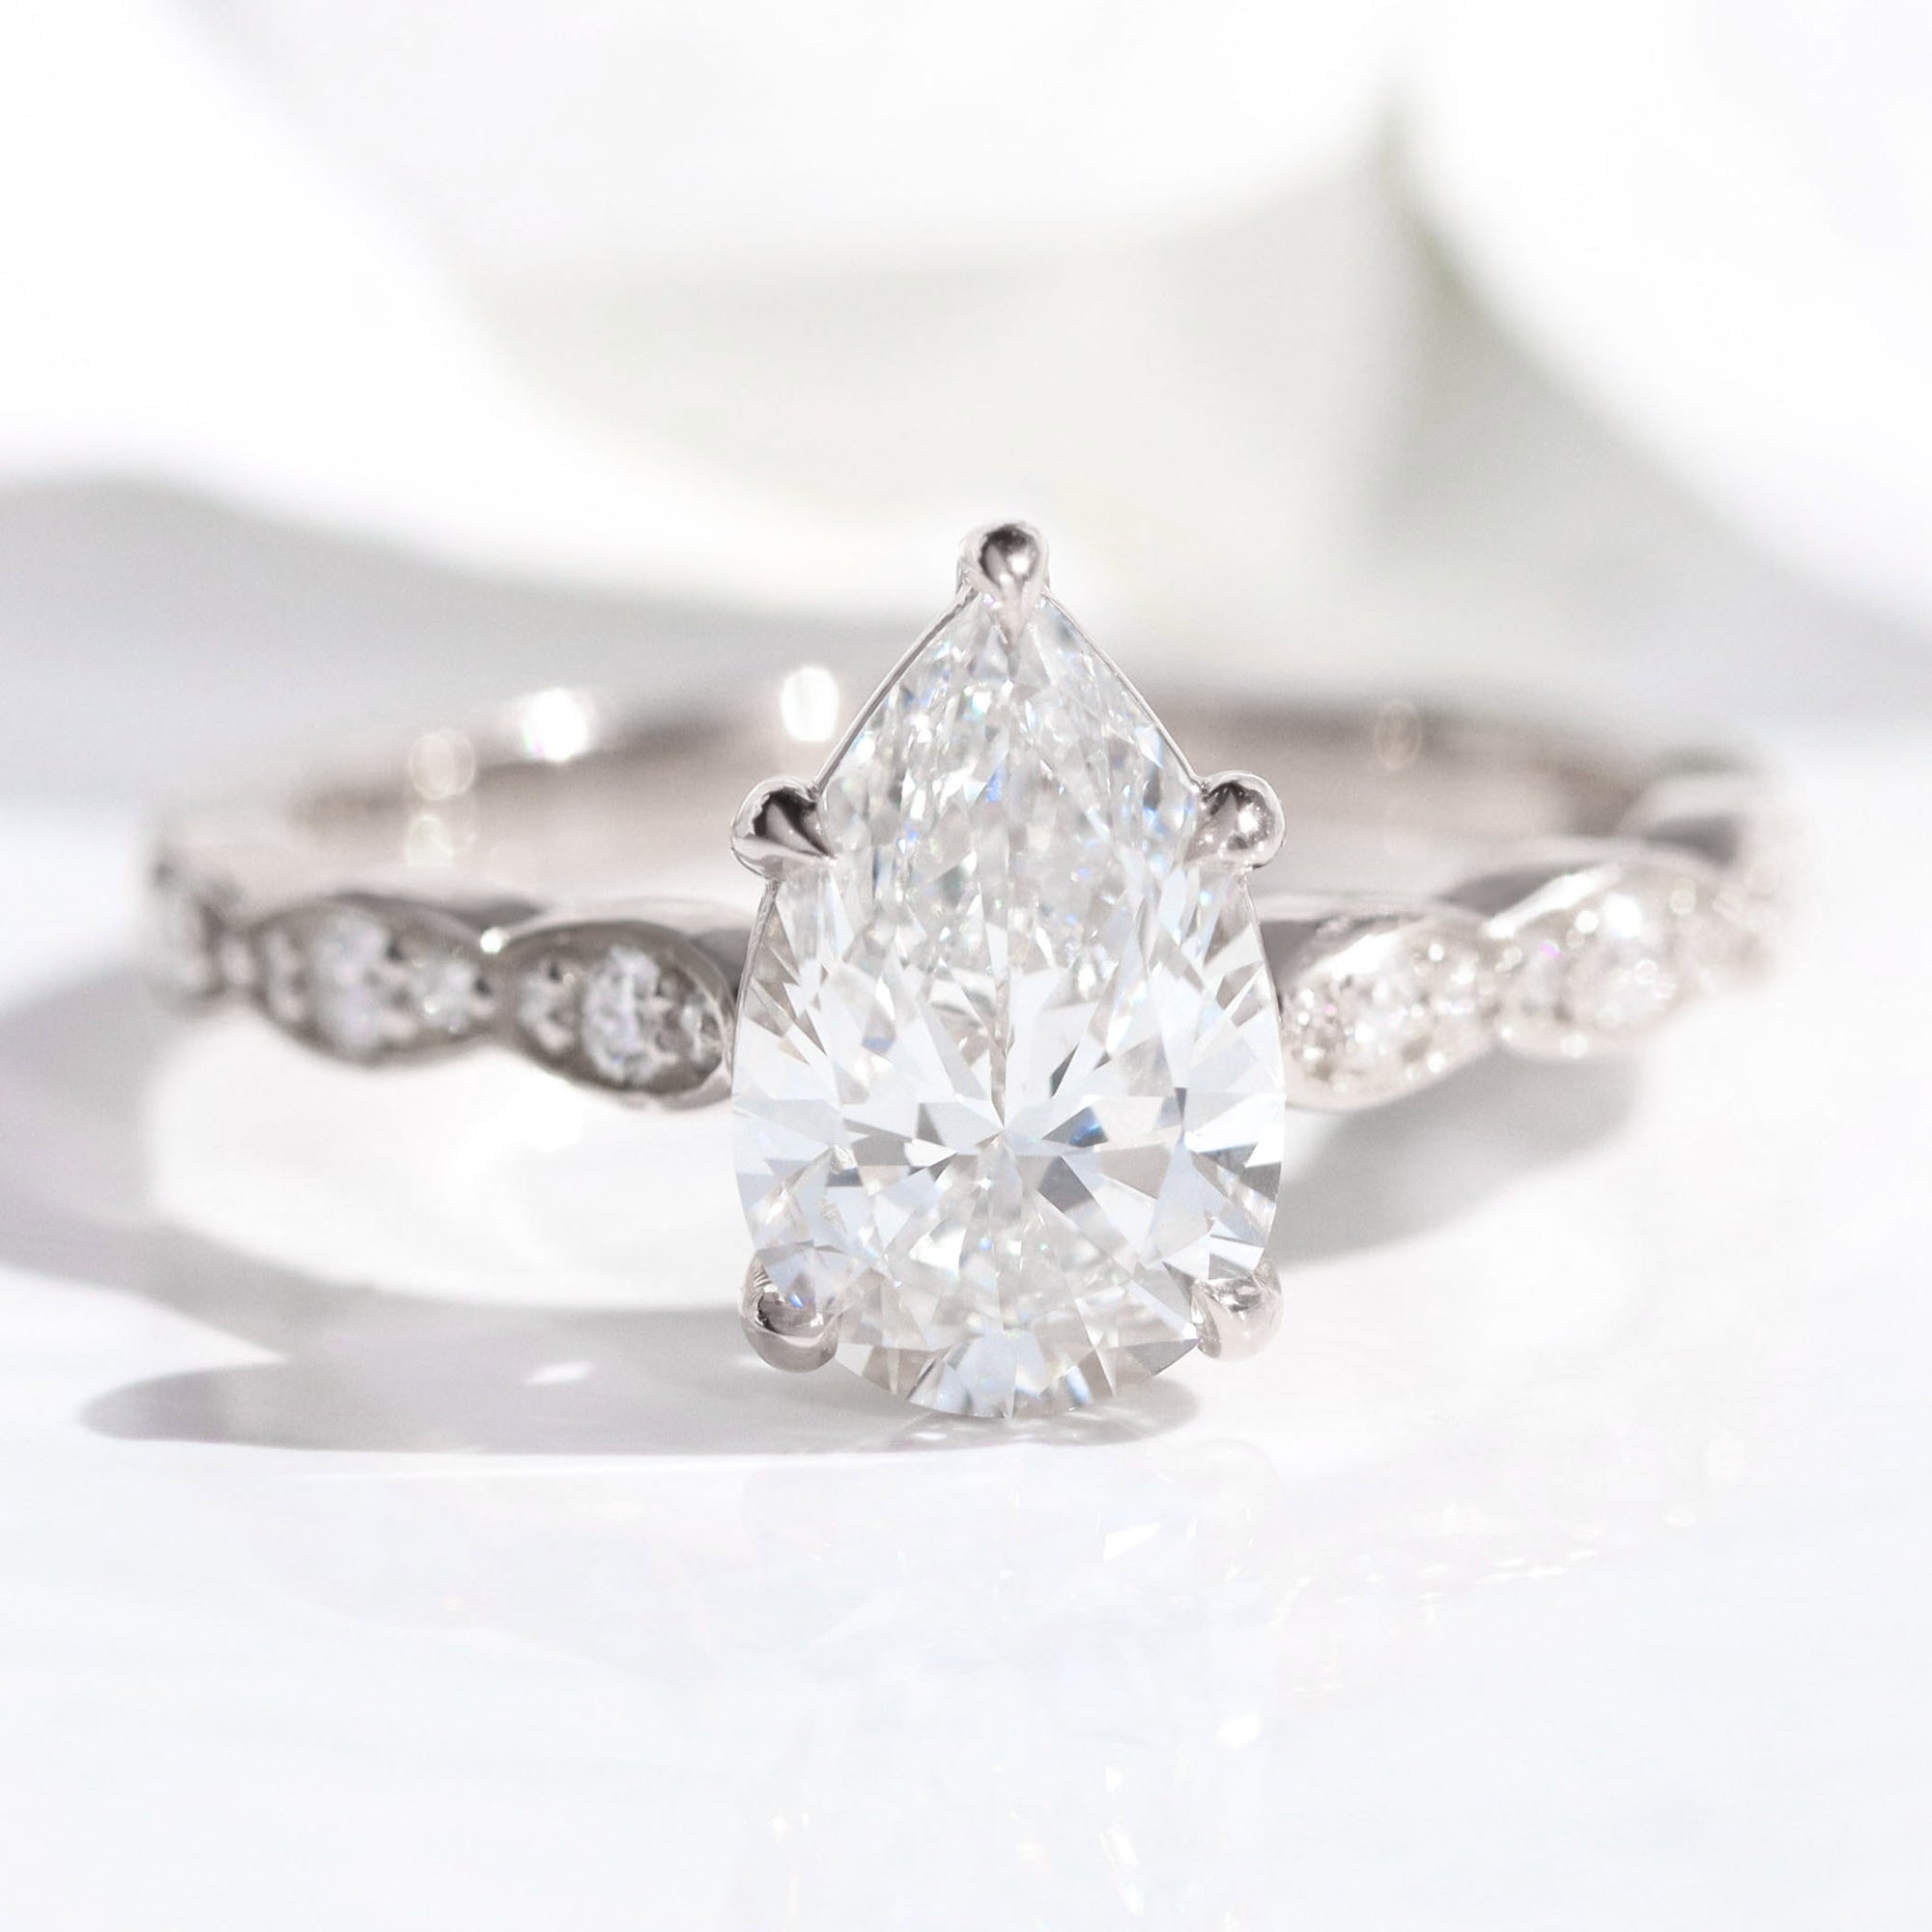 lab diamond ring white gold pear diamond solitaire engagement ring La More Design Jewelry